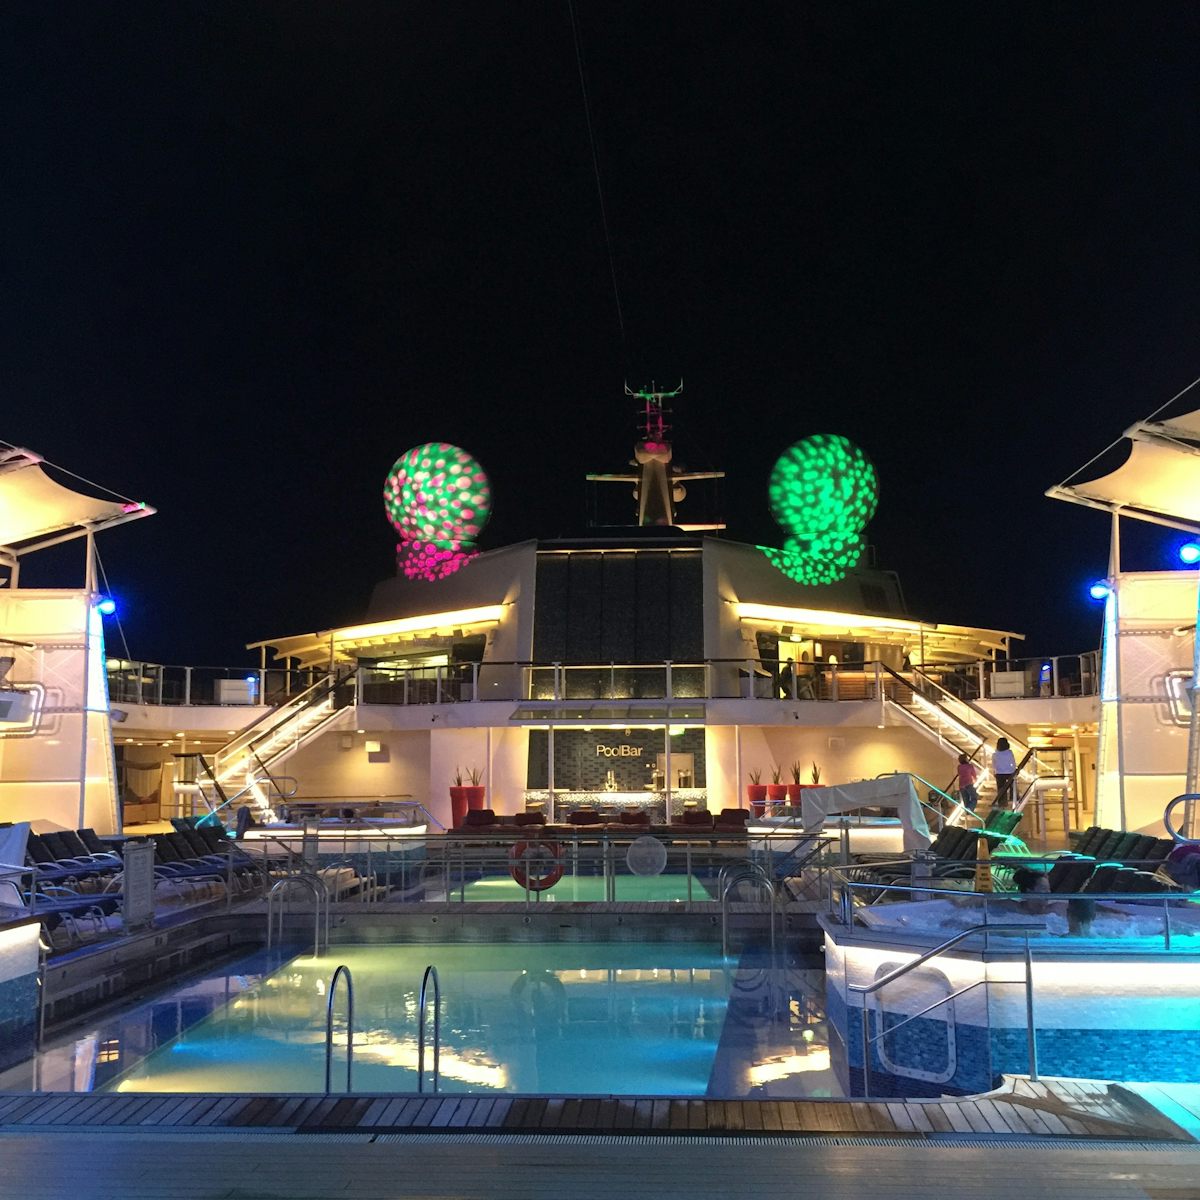 Pool deck by night